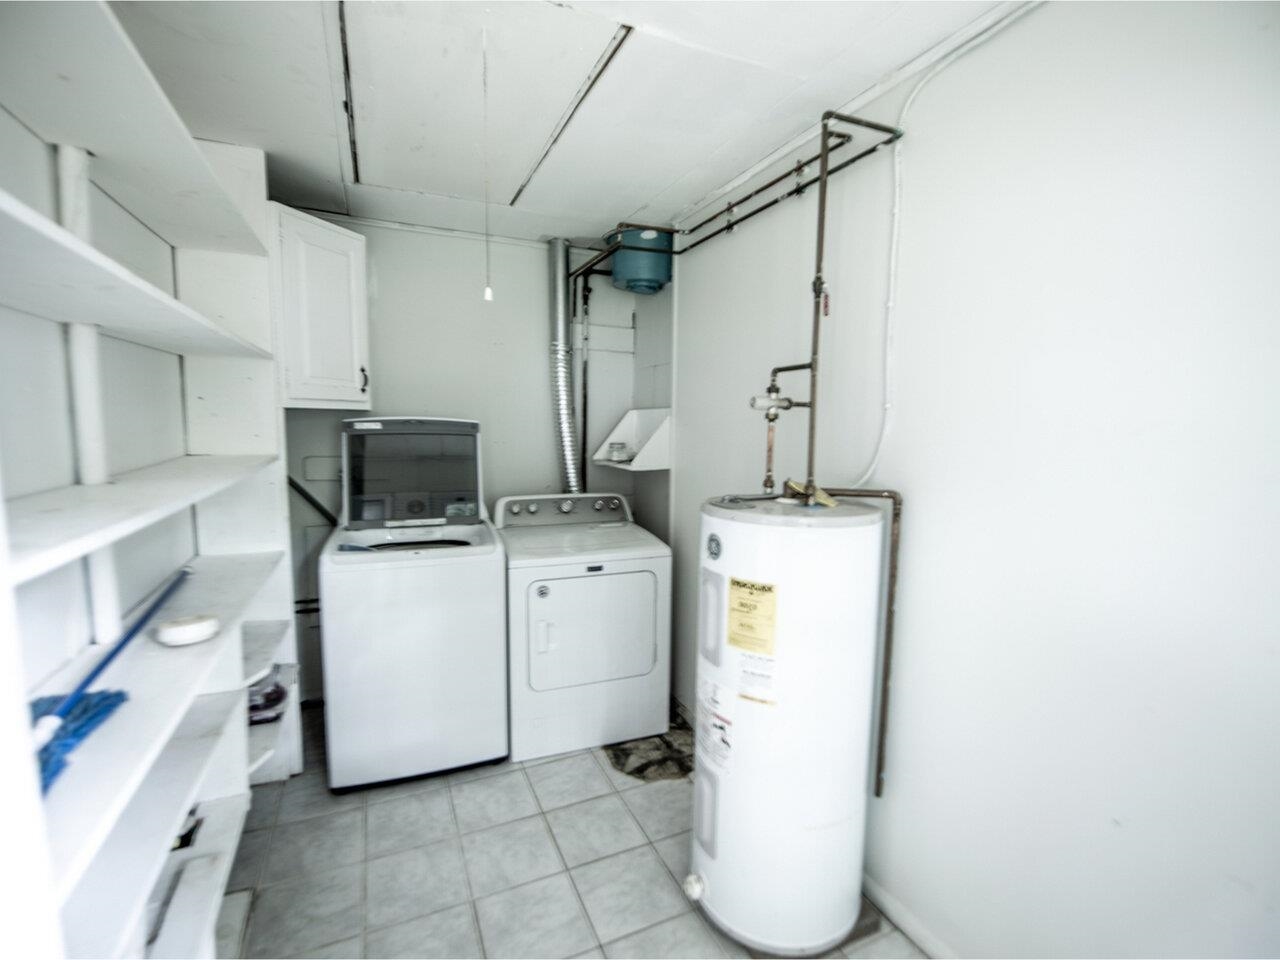 Utility room with washer/dryer